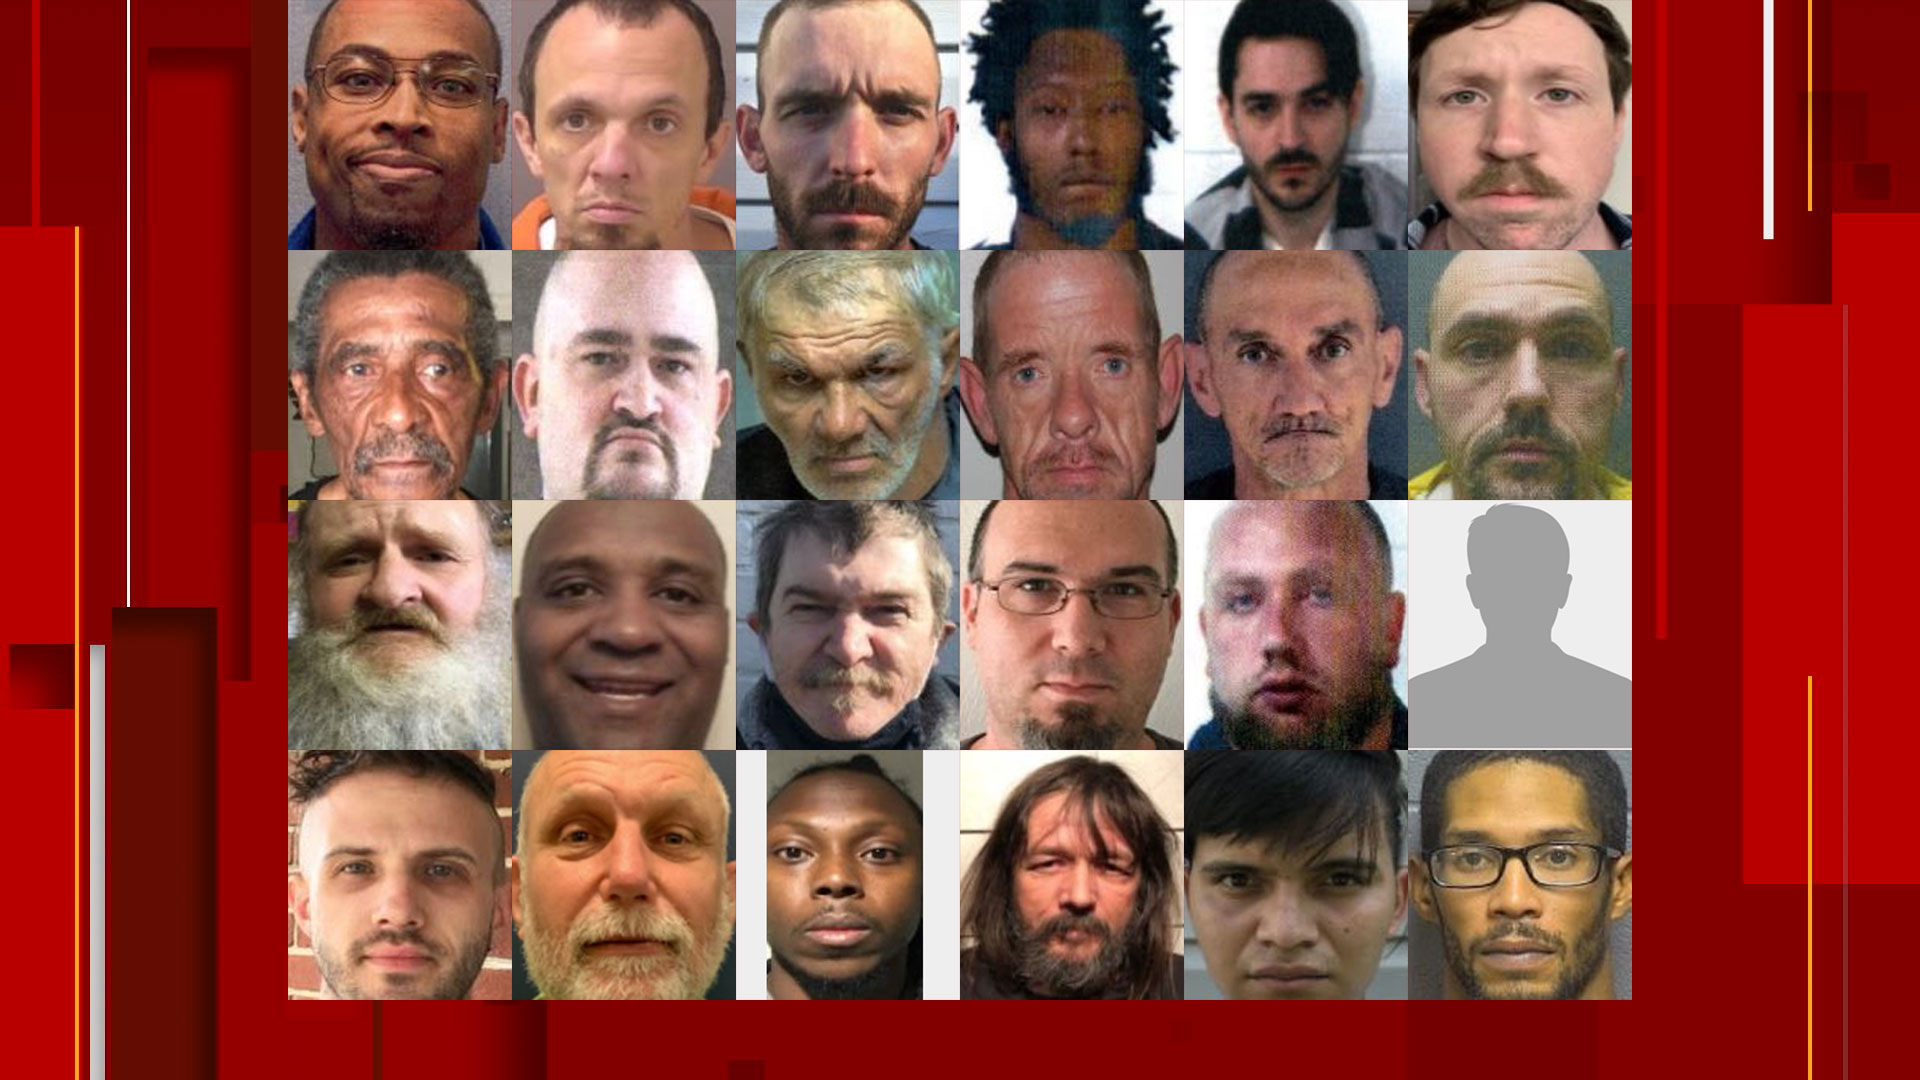 24 registered sex offenders arrested in Virginia as part of joint operation